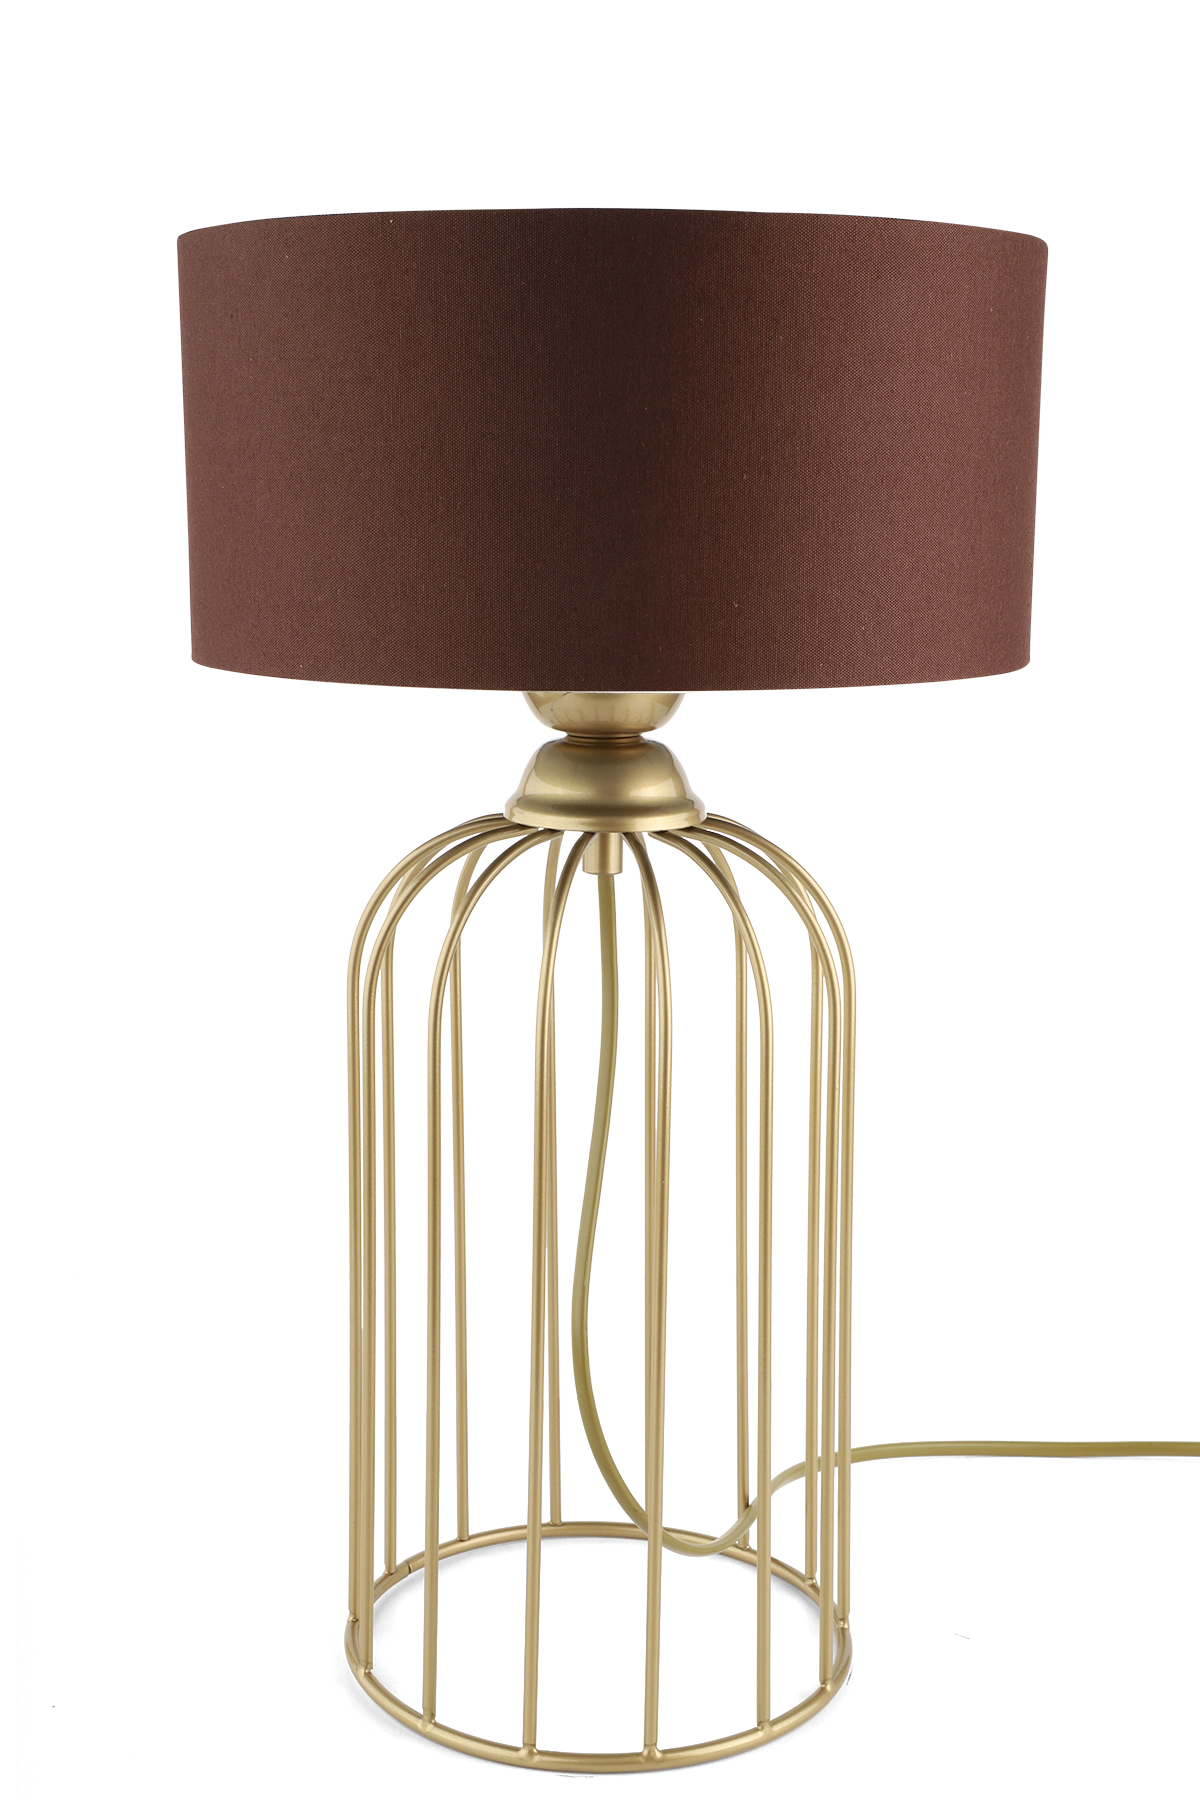 Tema Table lamp Antique,Brown